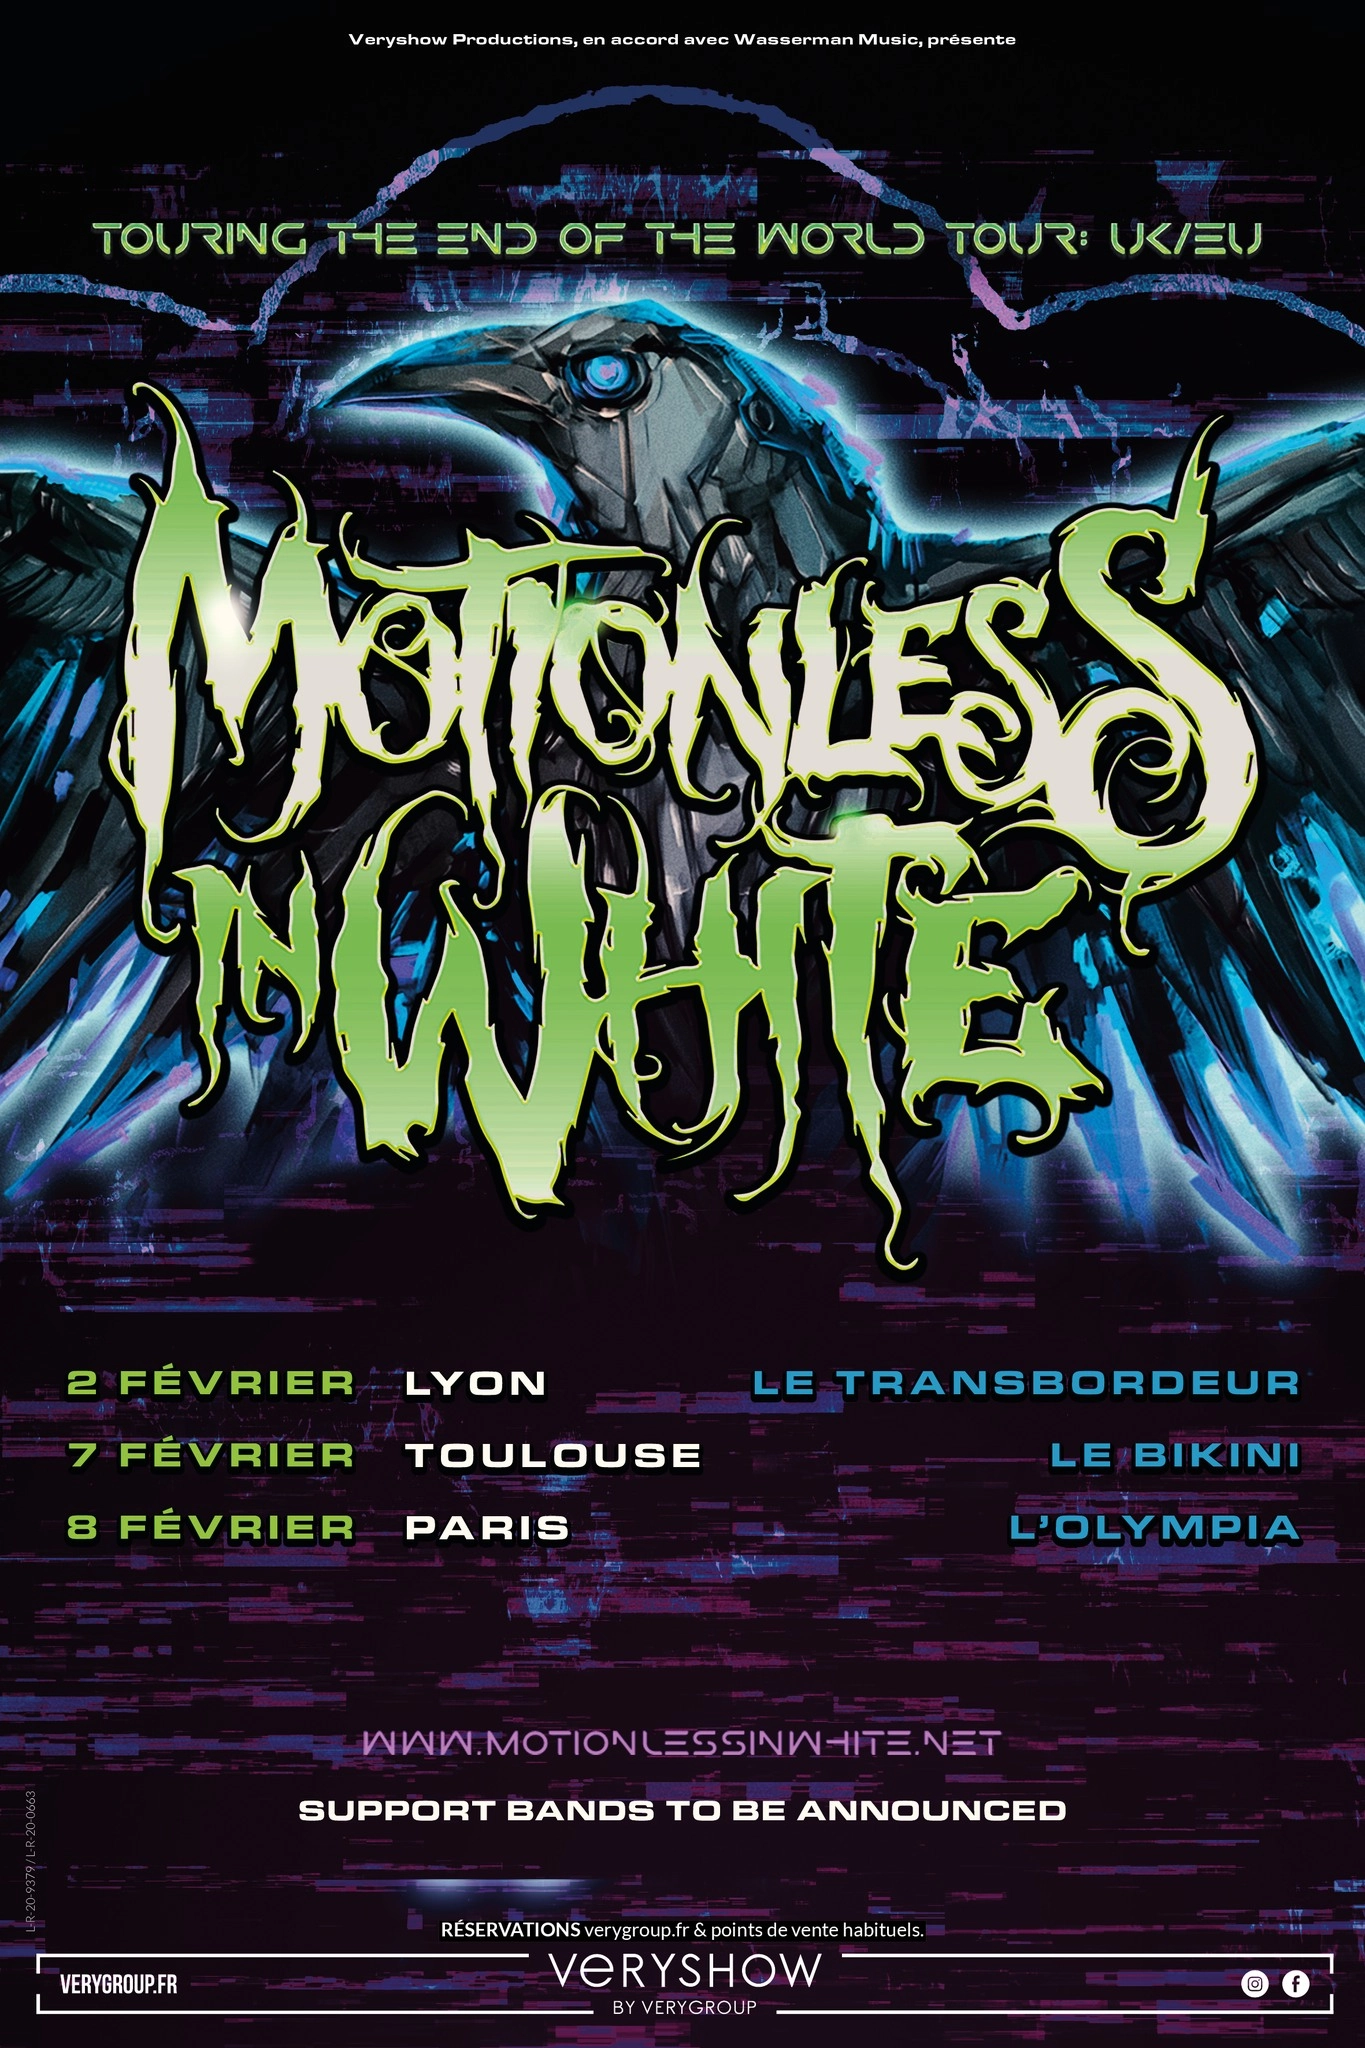 Motionless In White in der Le Transbordeur Tickets